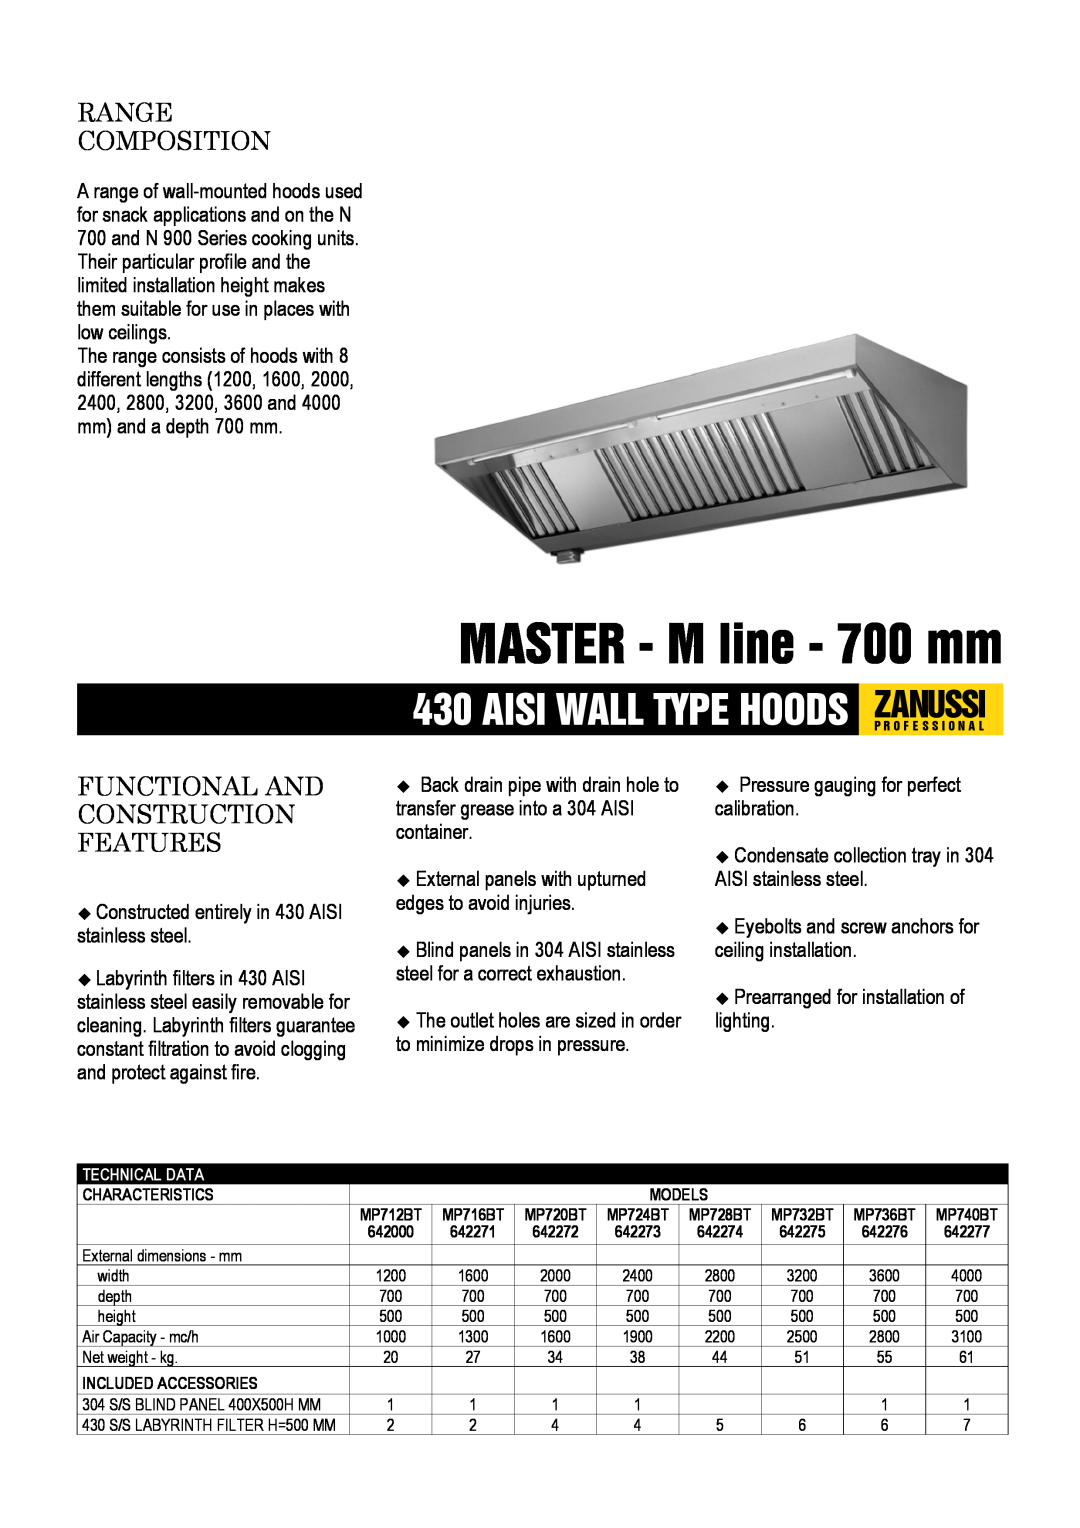 Zanussi 642276, 642277, 642275 dimensions MASTER - M line - 700 mm, Range Composition, Functional And Construction Features 